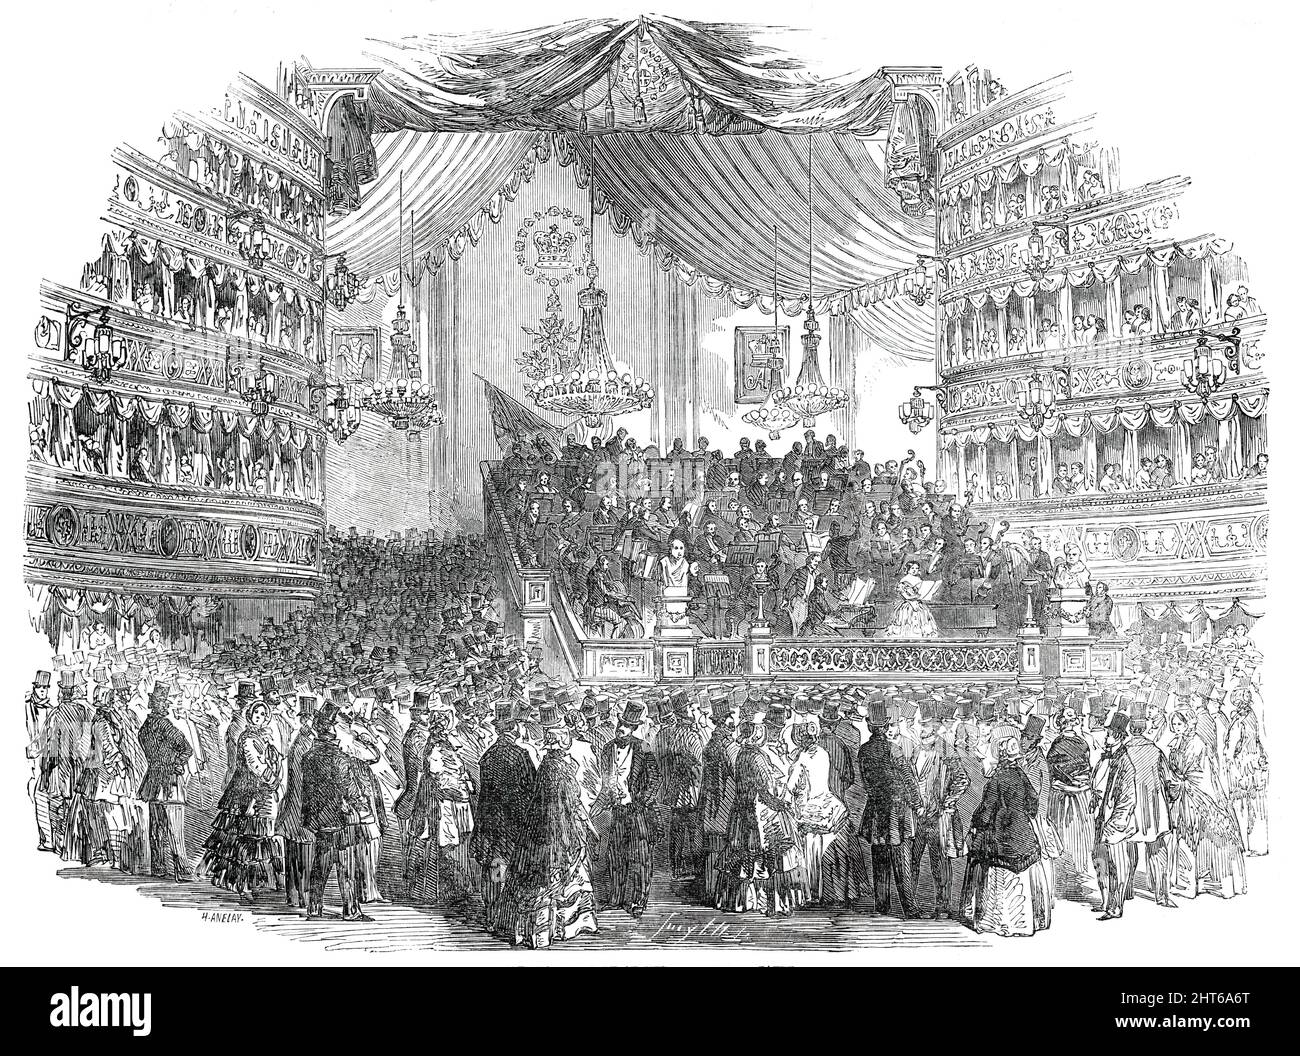 National Concert at Her Majesty's Theatre, [London], 1850. 'It is highly creditable to the direction of the above entertainments at Her Majesty's Theatre, that so much alacrity has been displayed in amending the errors of inexperienced management. It is an excellent sign when such promptitude is manifested to consult the wants and wishes of the really musical public. Many causes of complaint as to convenience and comfort have been removed, and the schemes are gradually developing the vast resources at the command of the executive committee in the most advantageous light. The alteration in the Stock Photo